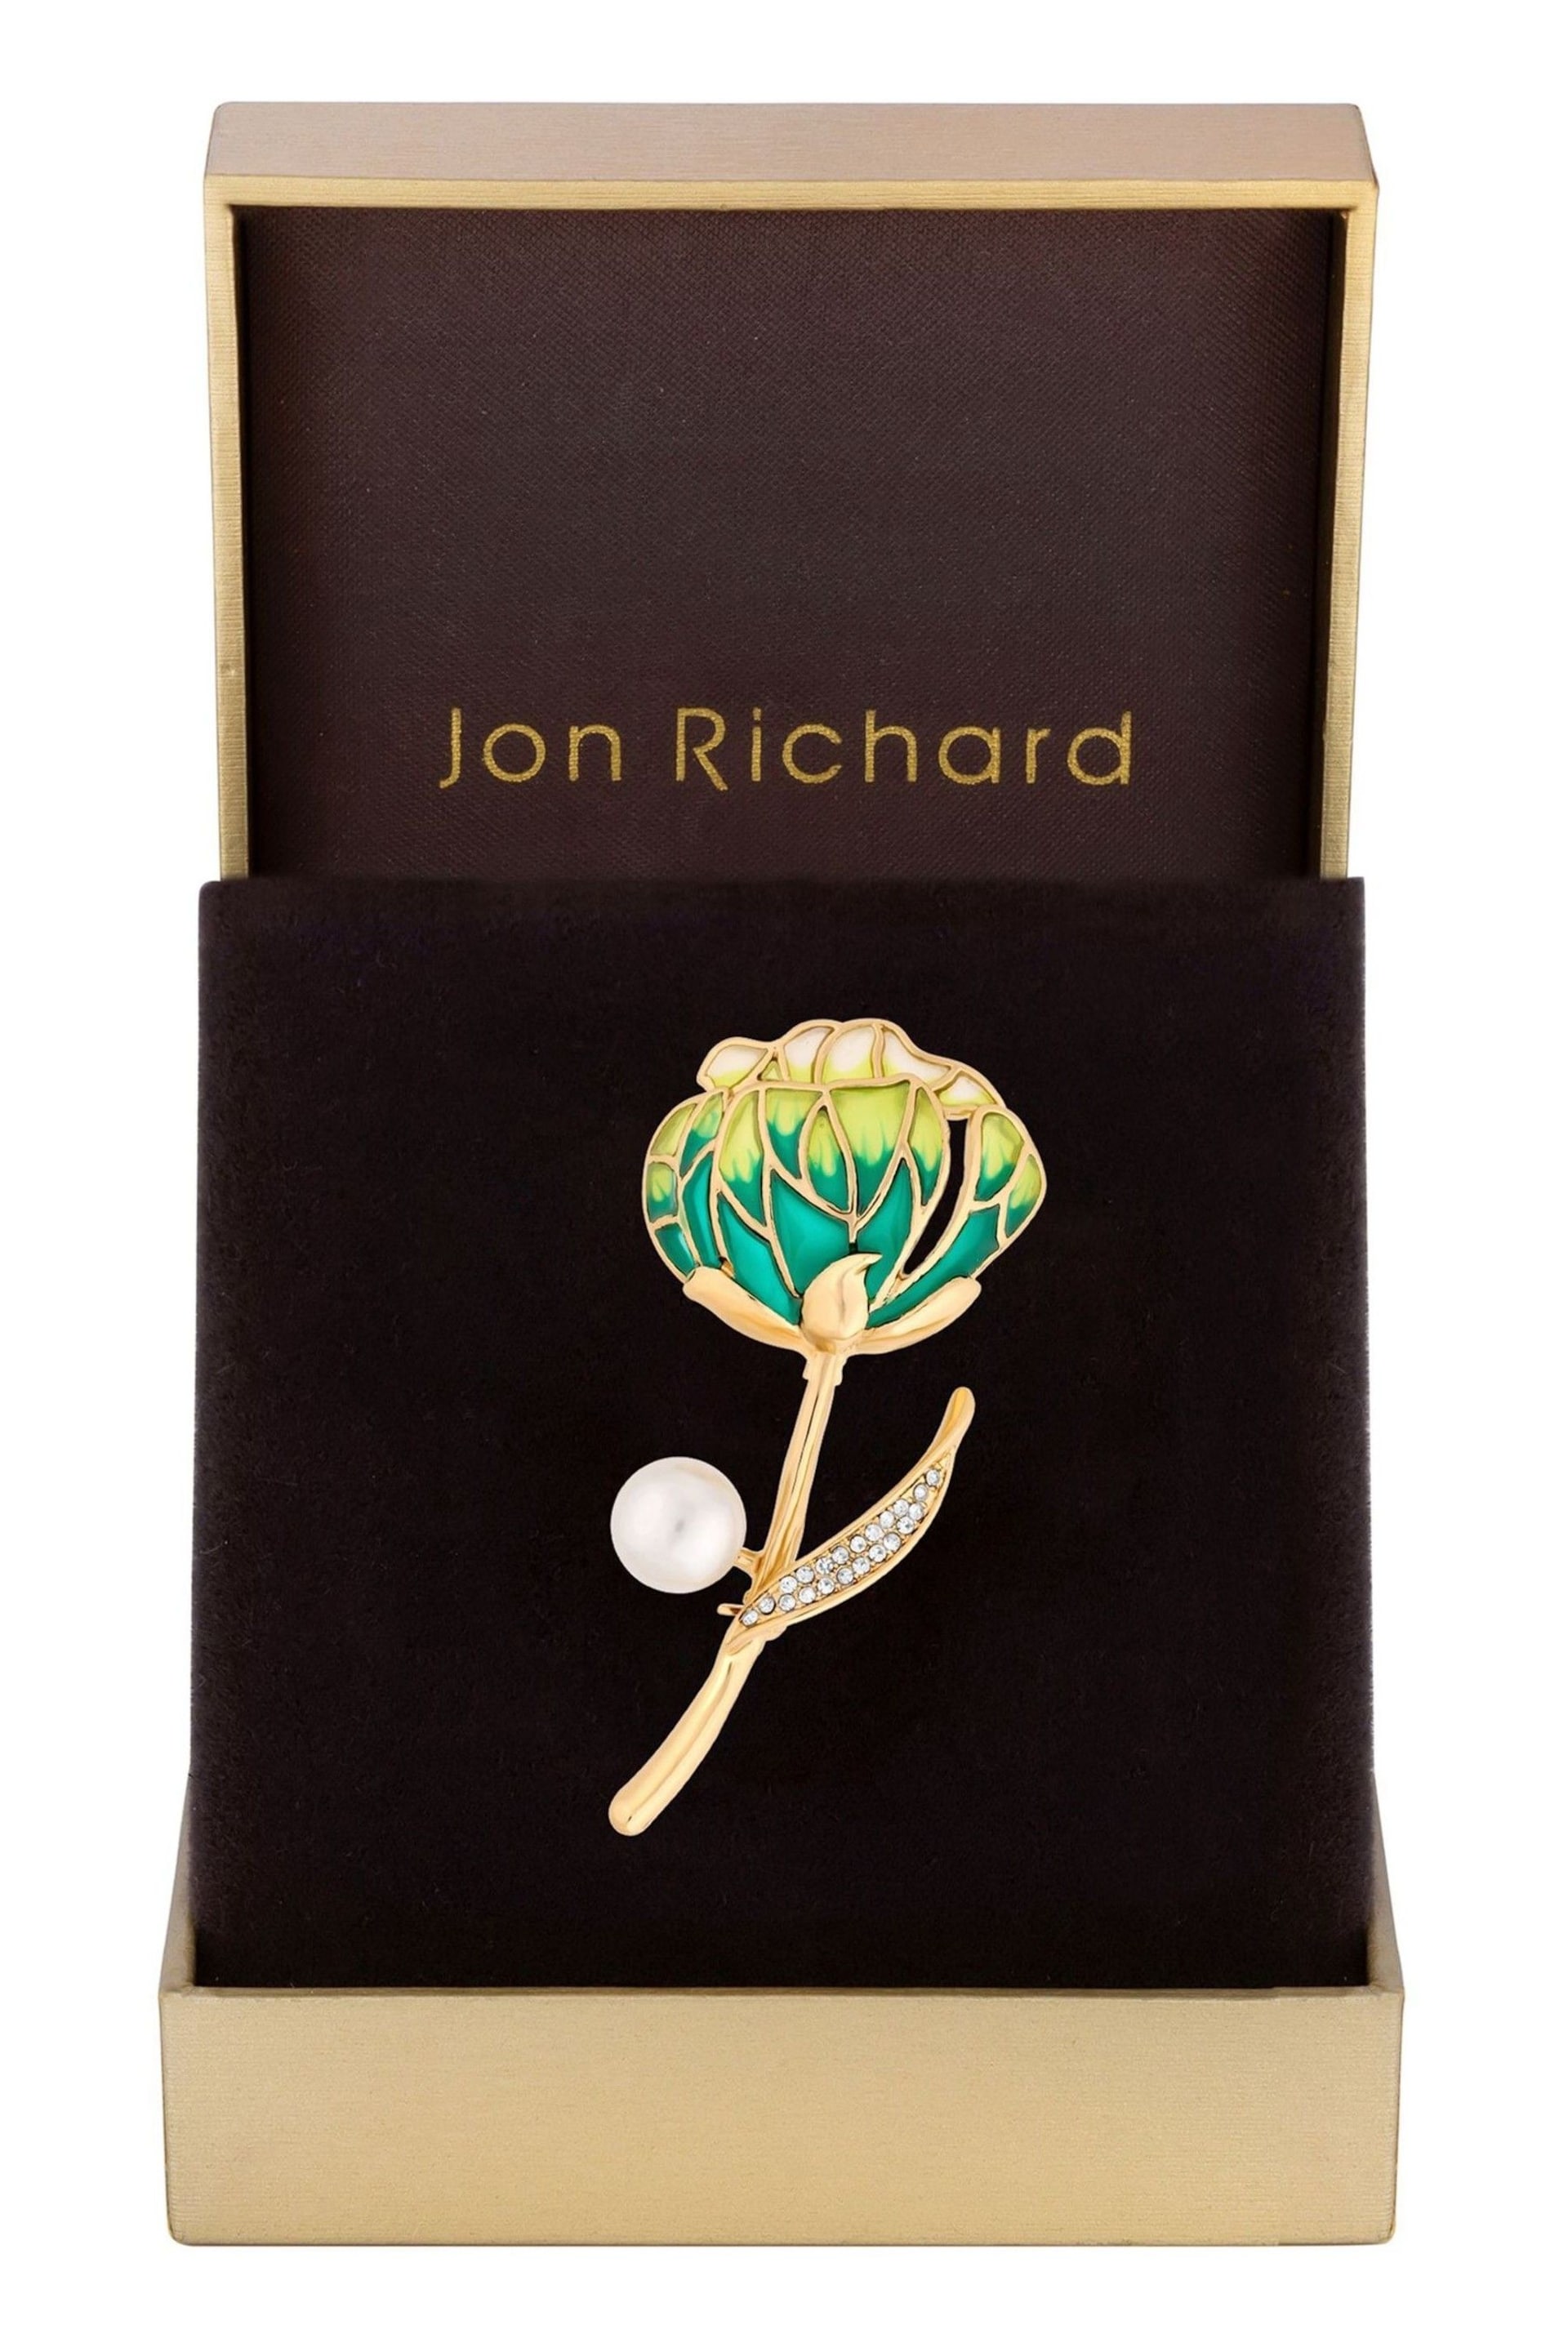 Jon Richard Gold Tone Gift Boxed Floral Brooch - Image 1 of 4